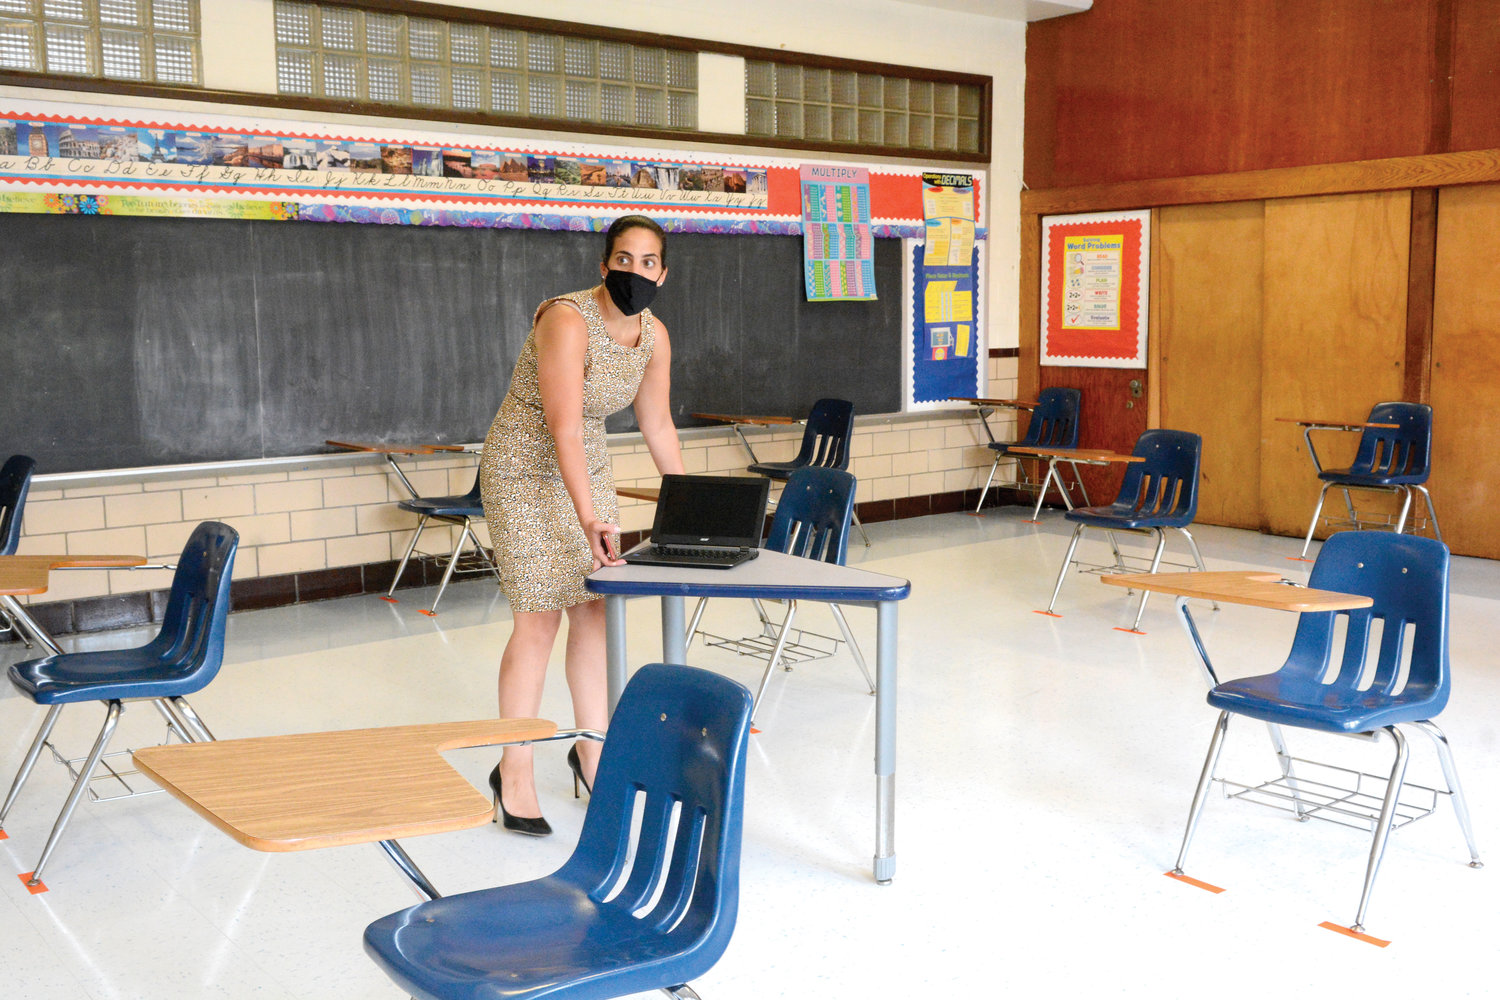 Amy Rodriguez, principal of Immaculate Conception School on East Gun Hill Road in the Bronx, gives a tour of the school showing coronavirus protocols in place July 22. Four pieces of tape strategically placed on the floor below the base of each leg of the desk chairs mark the spots to maintain a safe social distance.